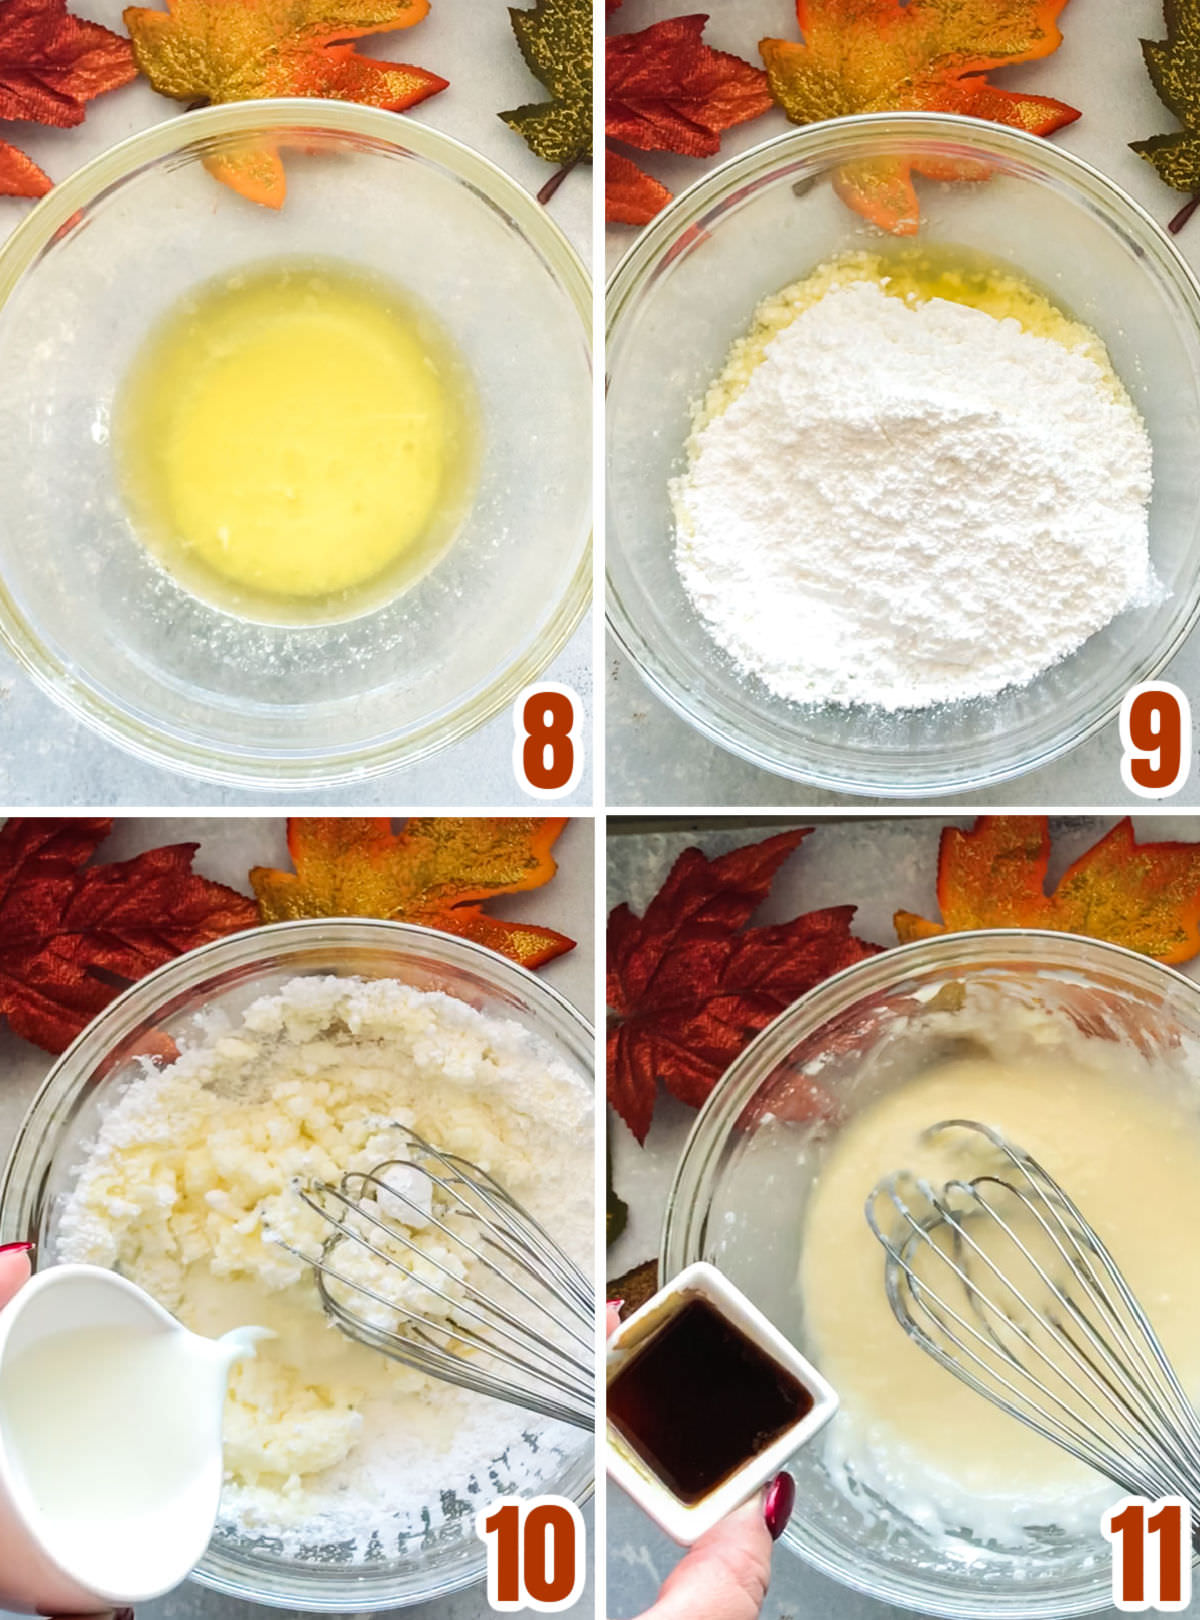 Collage image showing the steps for making the Cinnamon Roll icing.